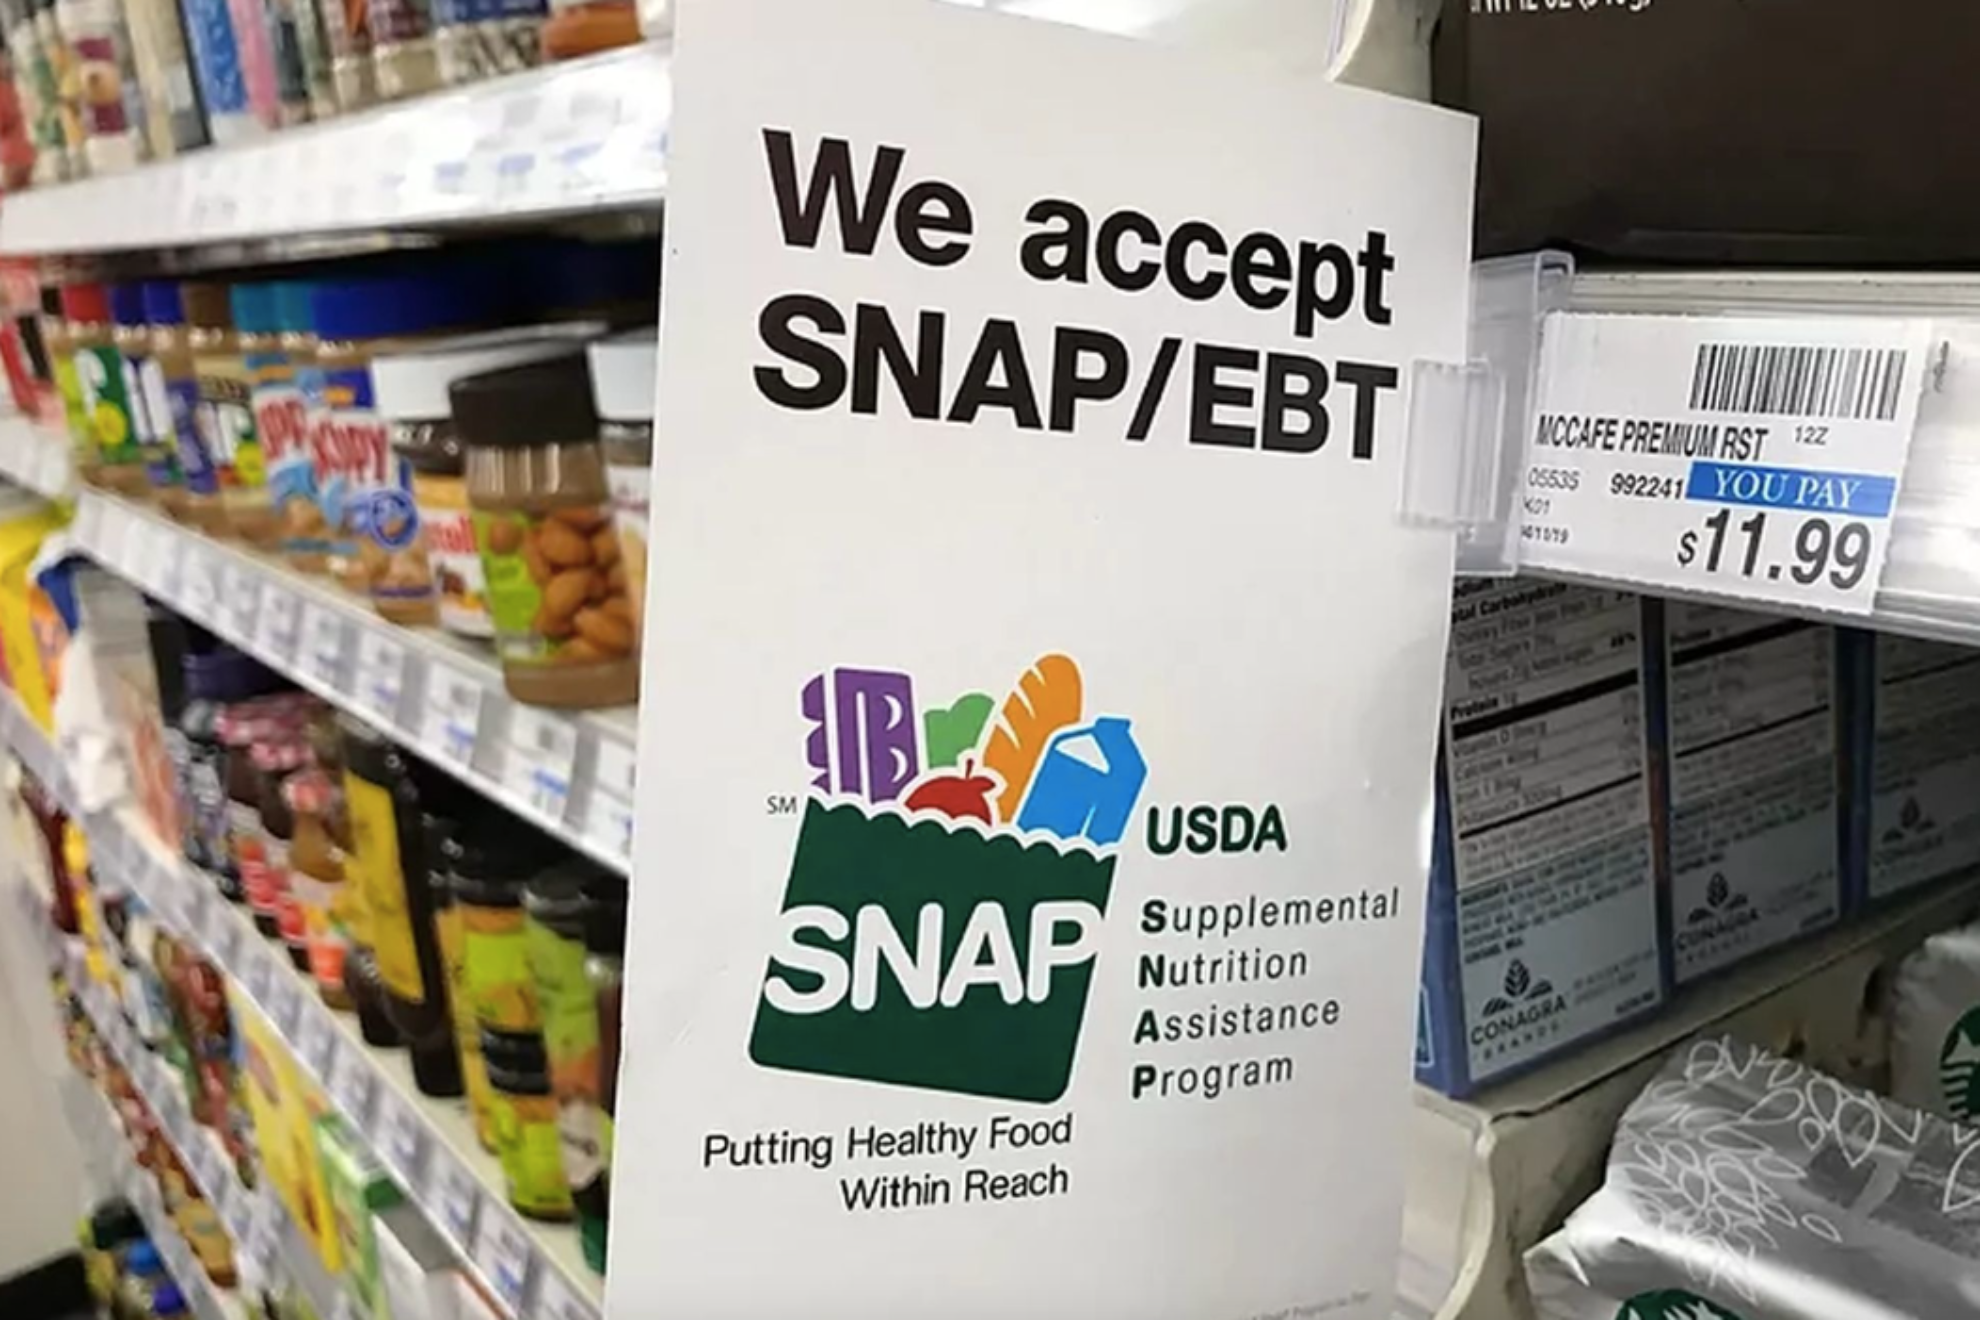 SNAP Benefits Florida: Will you get your first November payment this week even on the weekend?